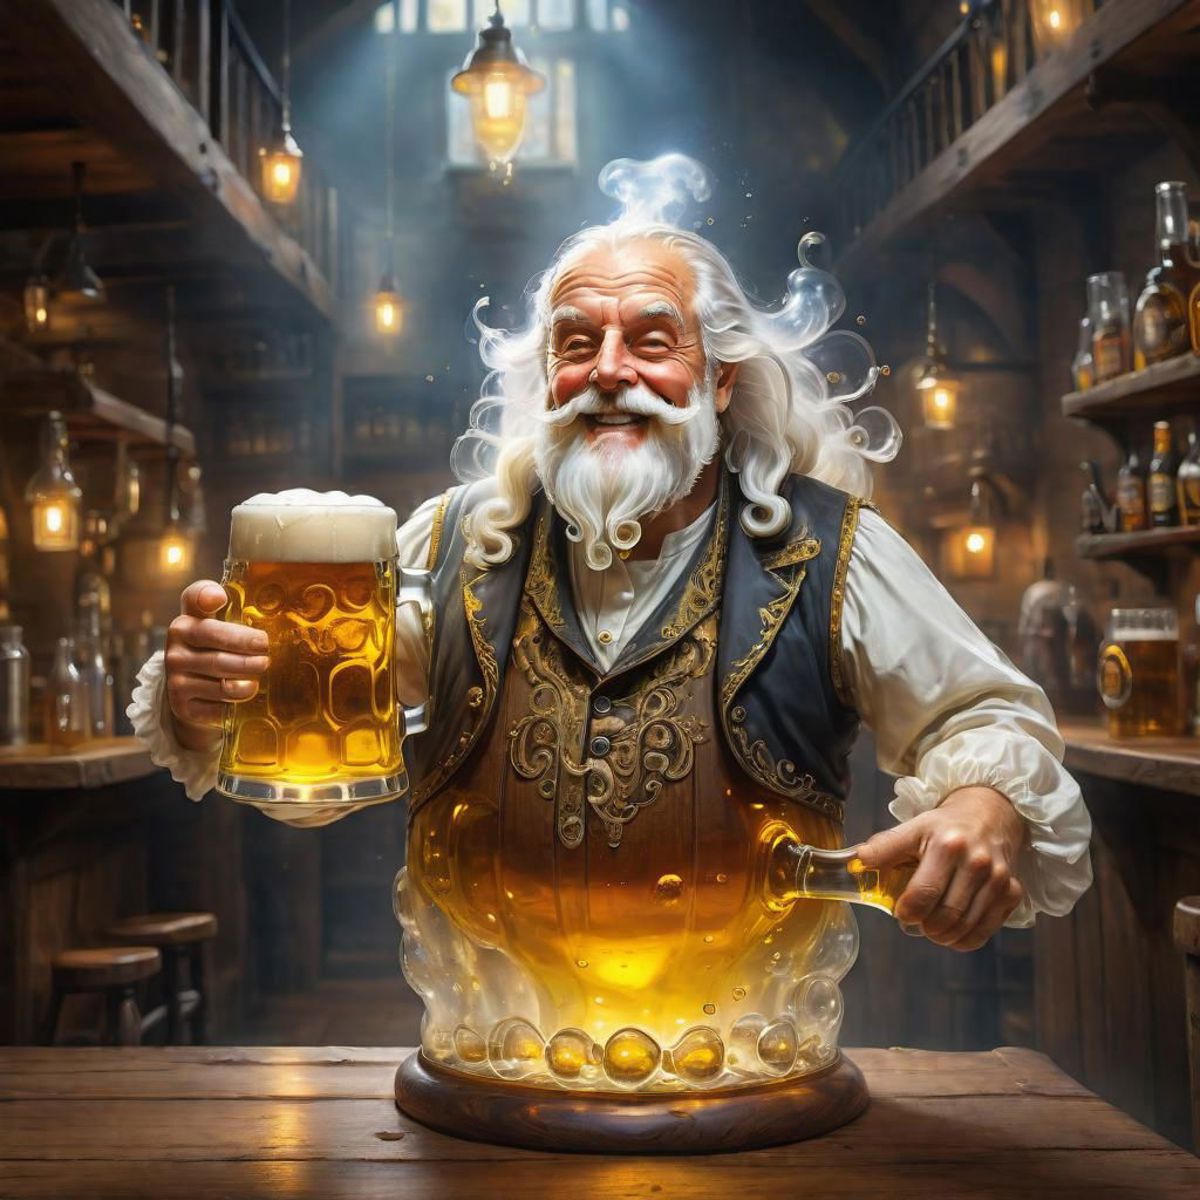 Santa Claus holding a beer in a bar setting.